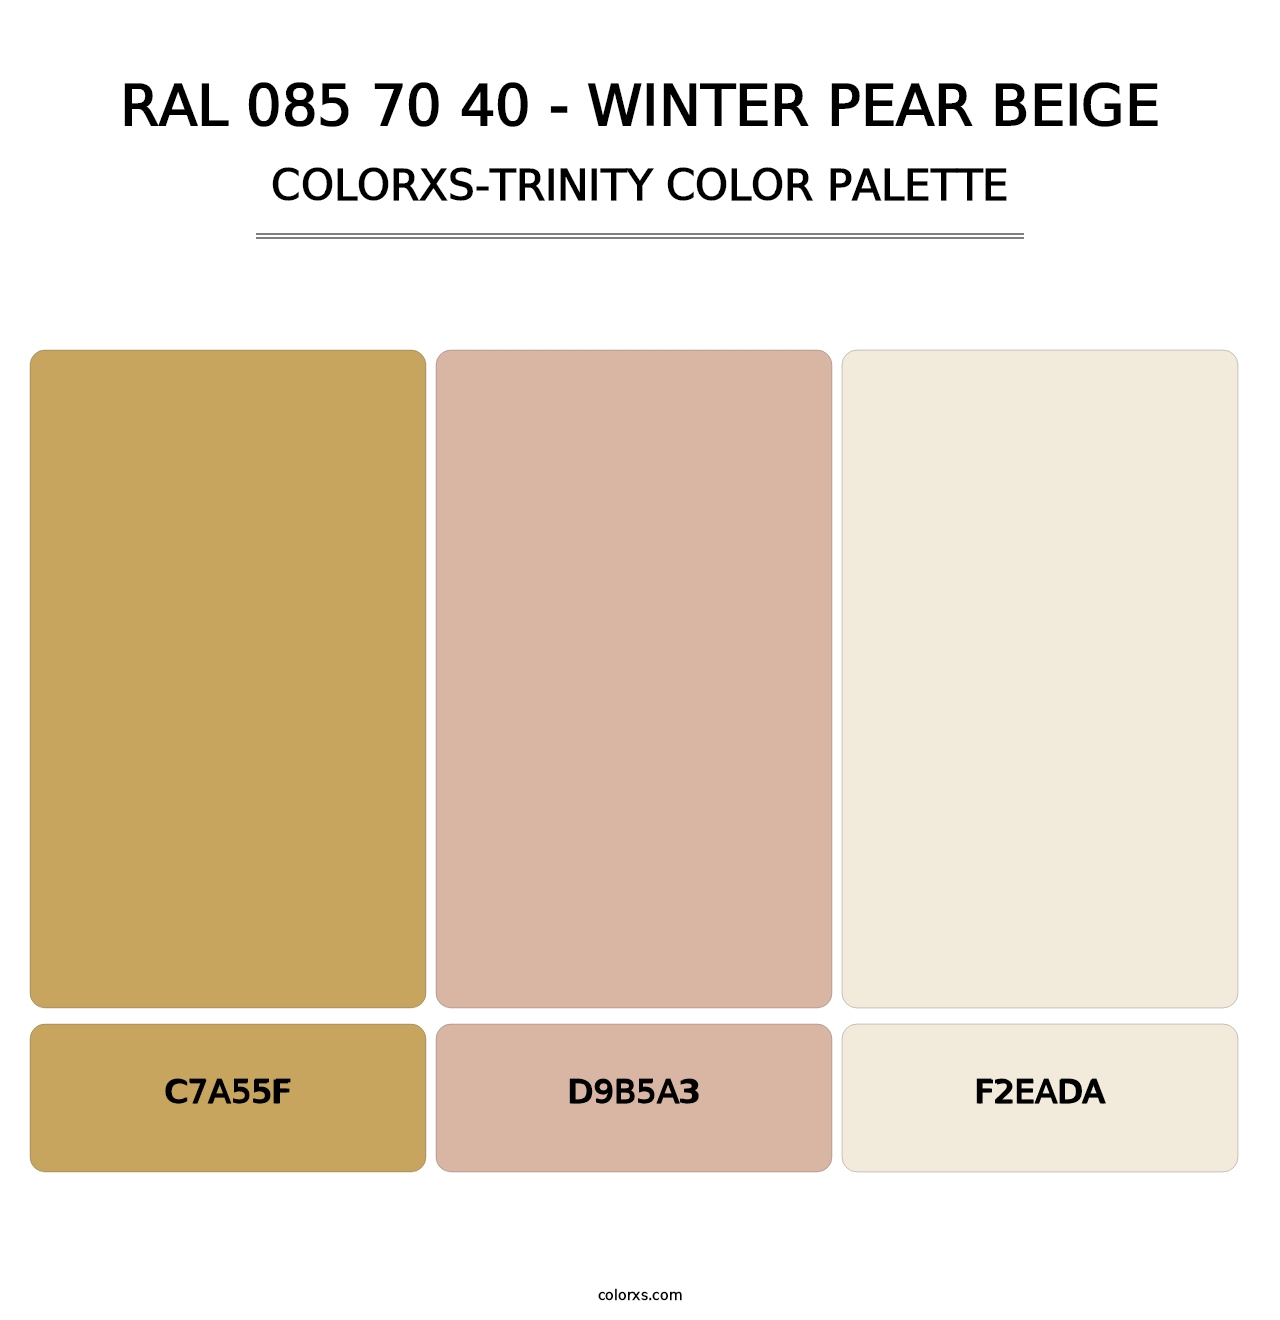 RAL 085 70 40 - Winter Pear Beige - Colorxs Trinity Palette